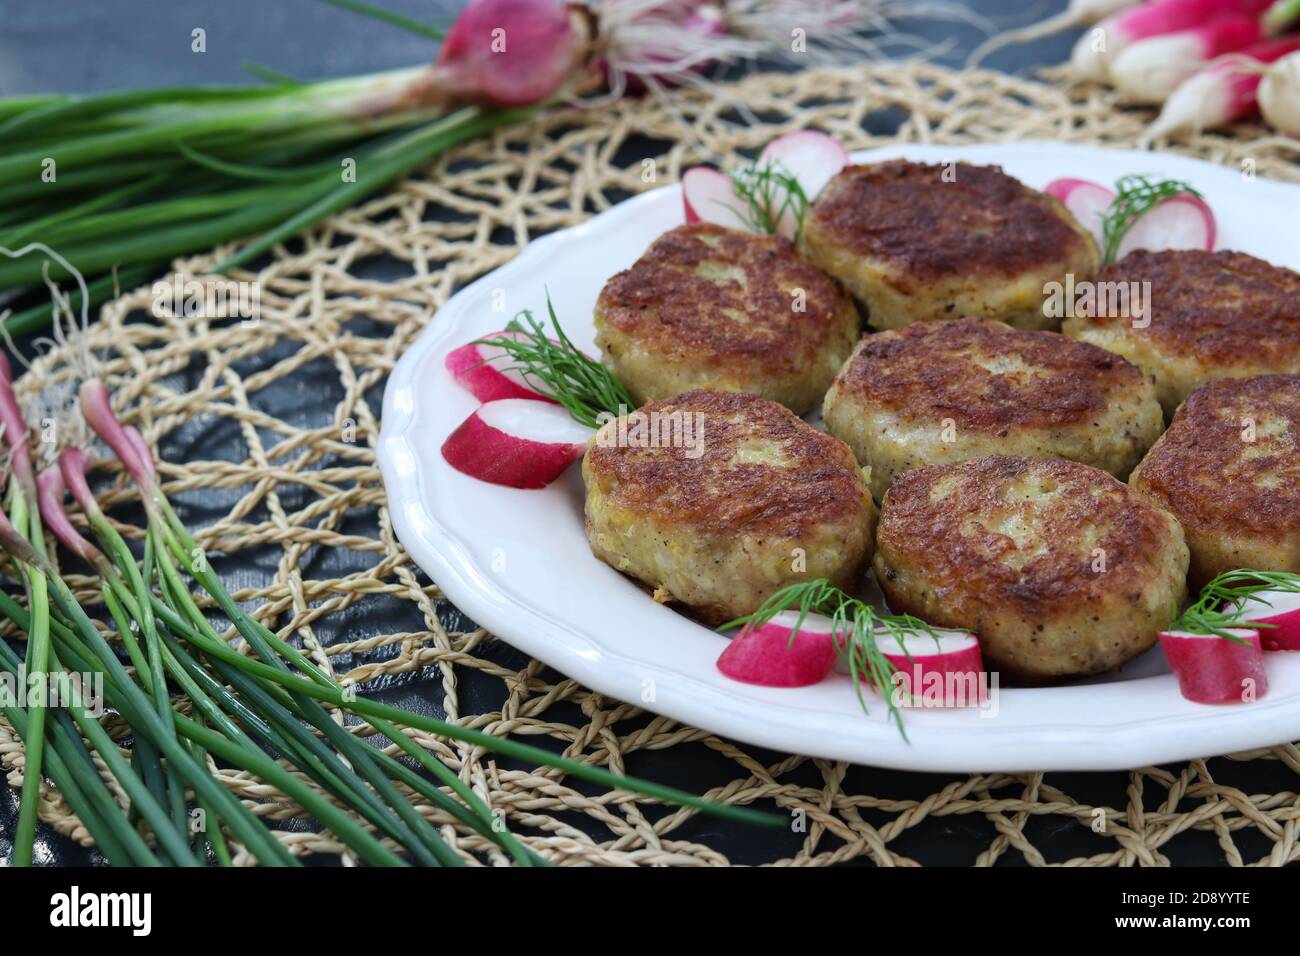 Fish patties on a white plate against a dark background Stock Photo